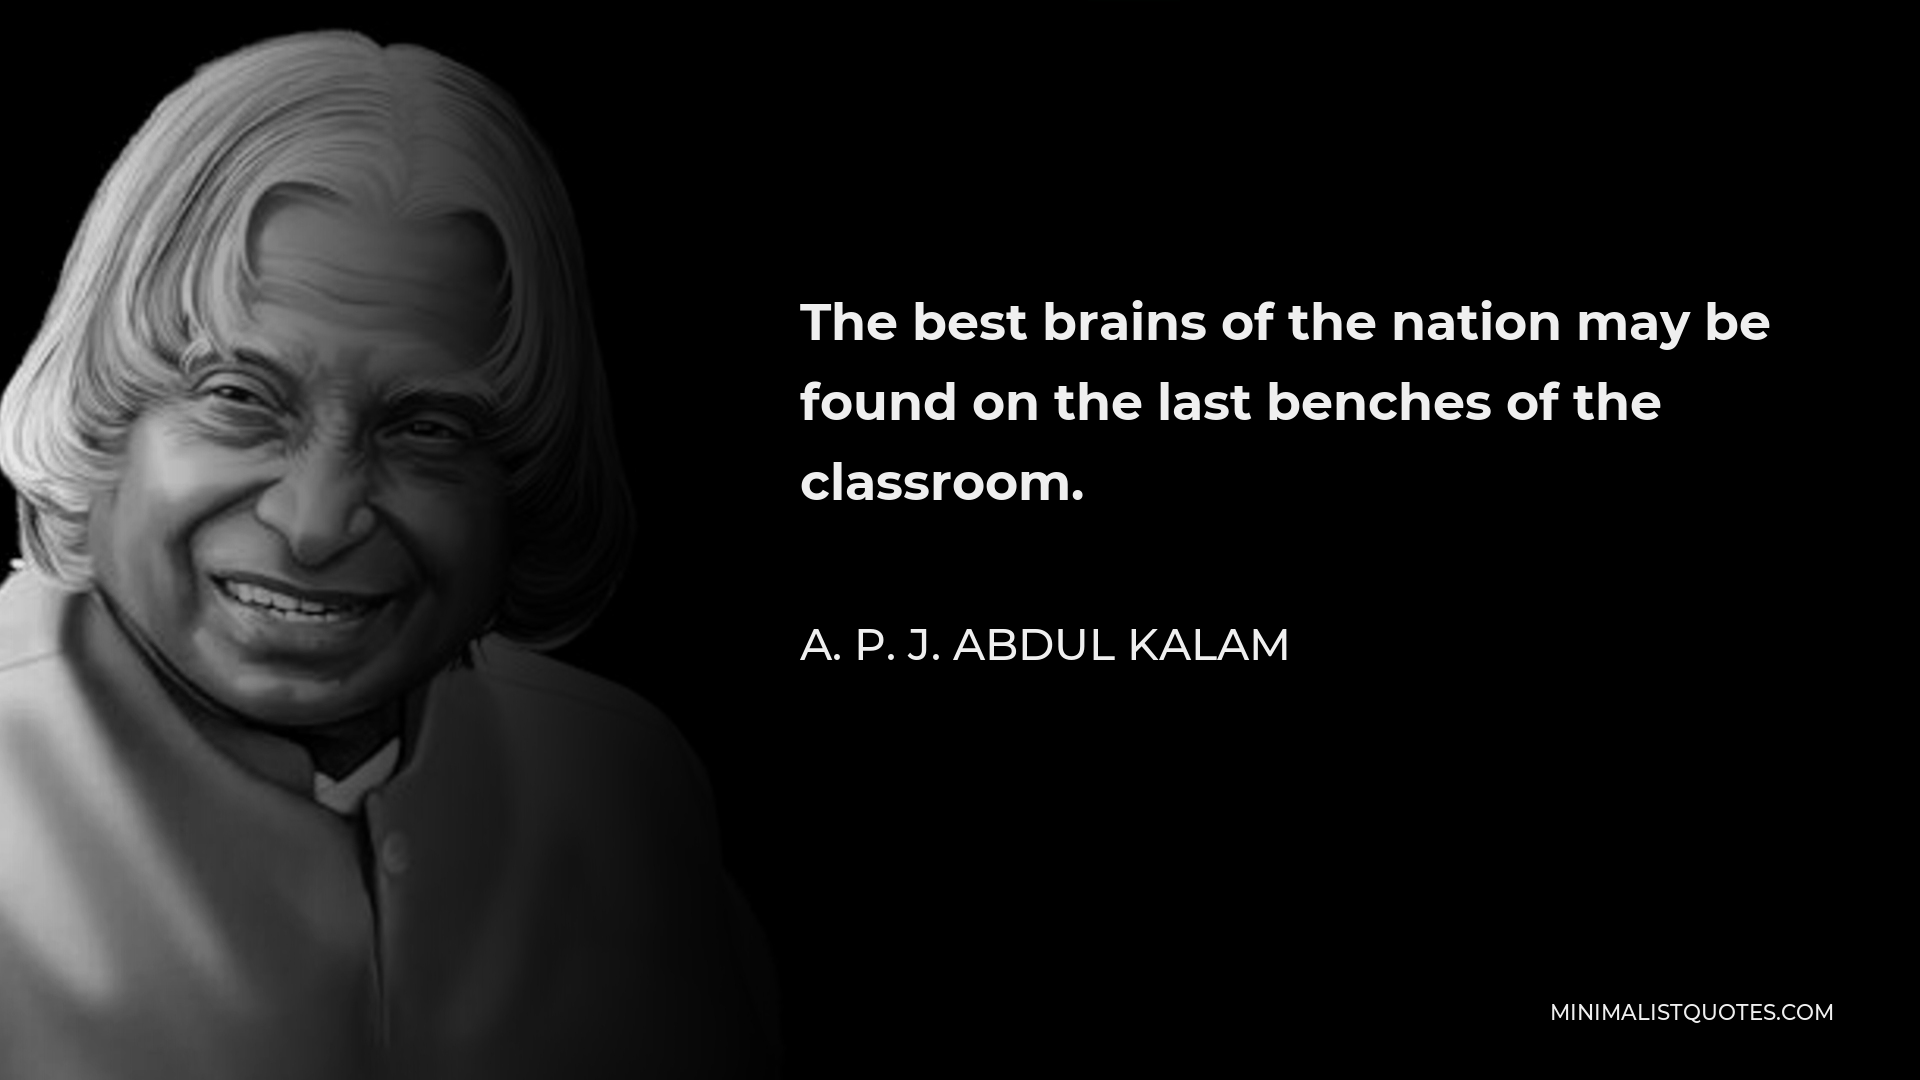 A. P. J. Abdul Kalam Quote - The best brains of the nation may be found on the last benches of the classroom.